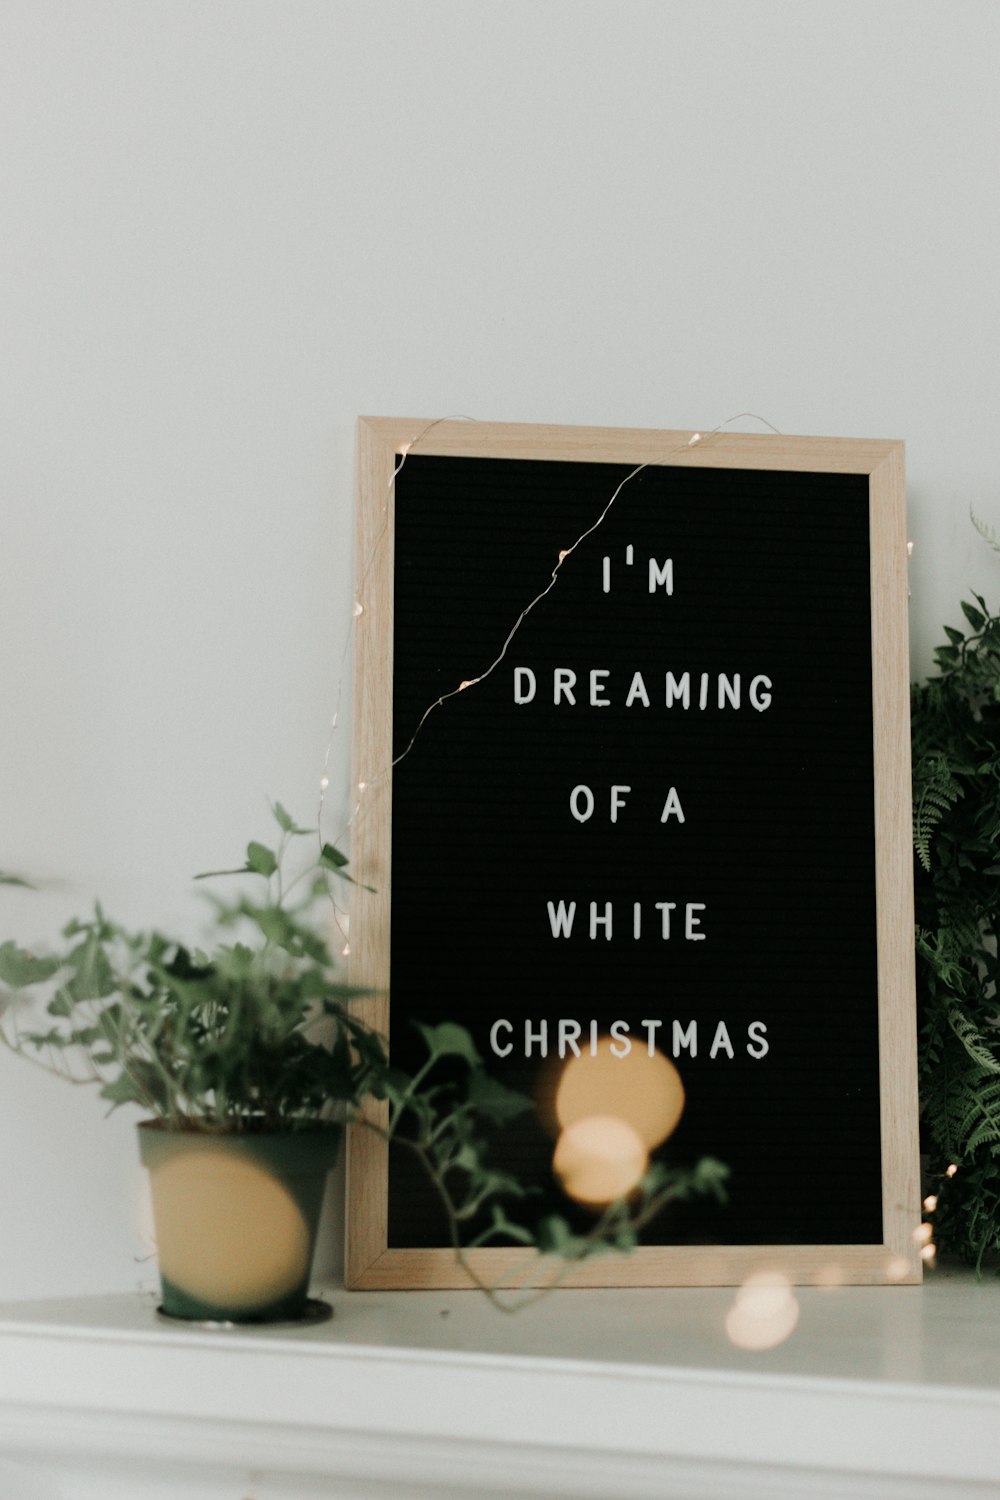 i'm dreaming of a white Christmas quote